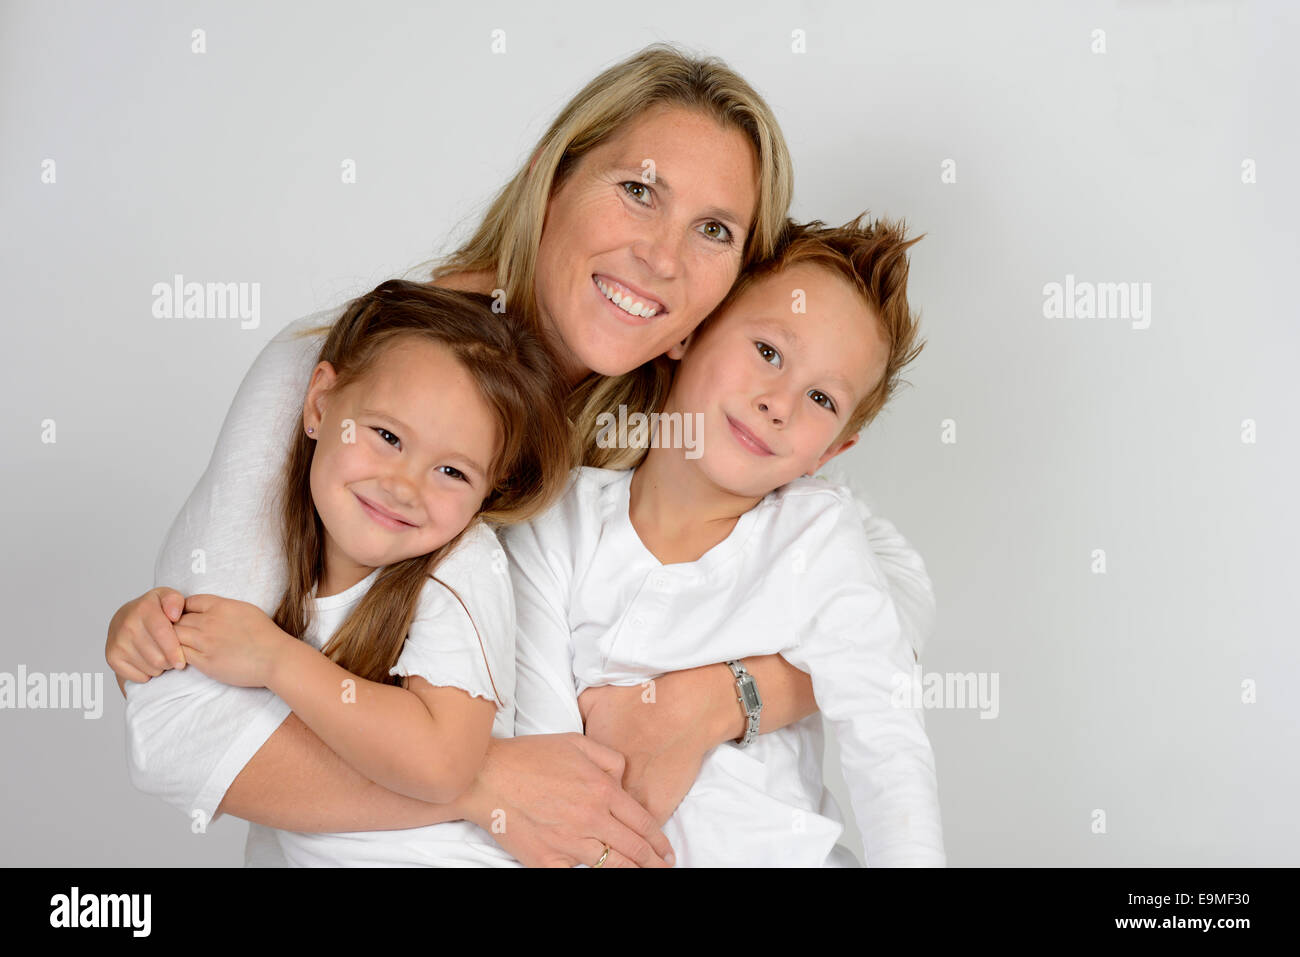 Mother with her two children, boy and girl Stock Photo